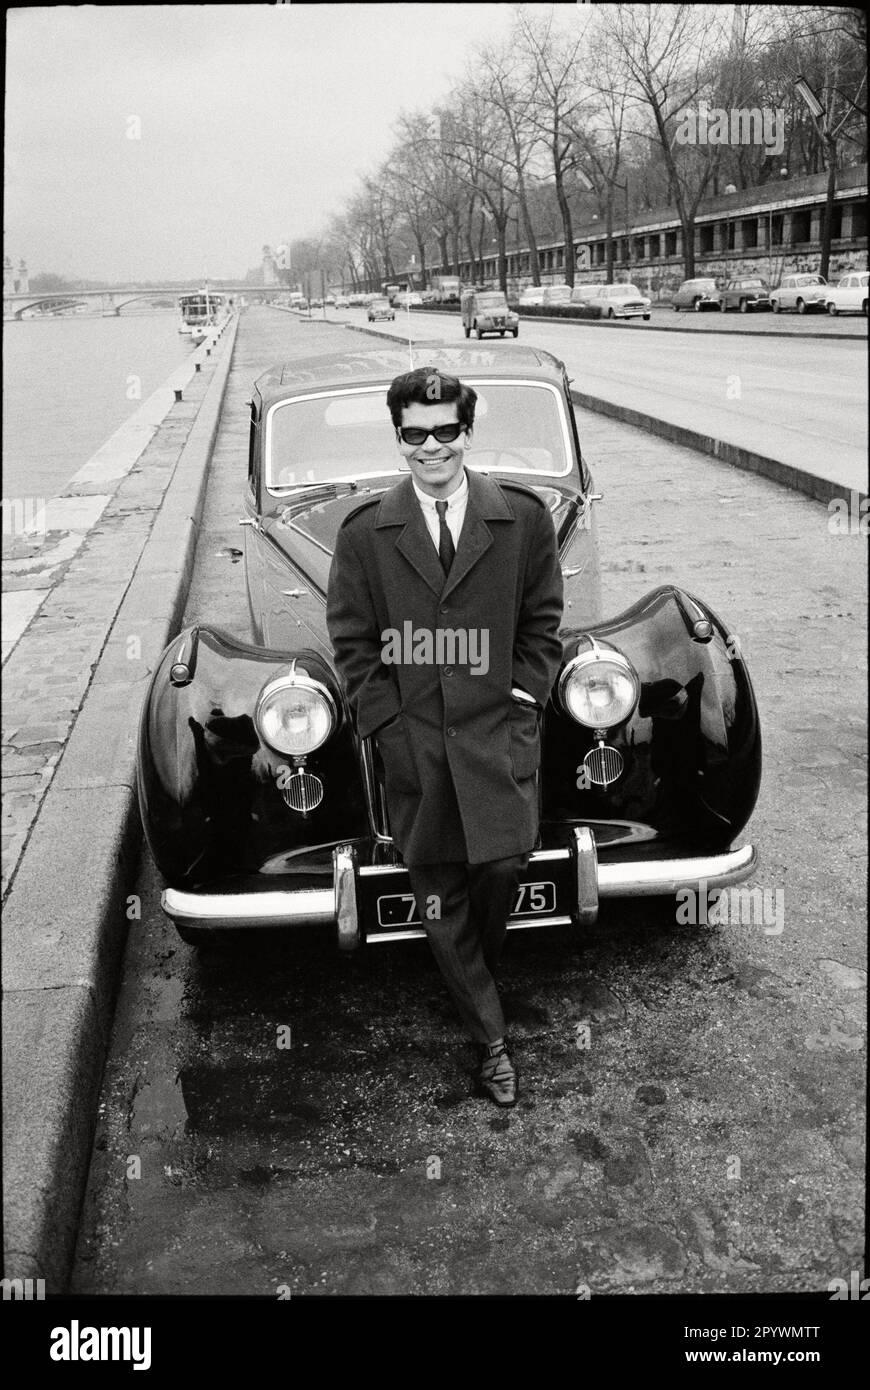 France.  Paris.  December 1962. German couturier Karl Lagerfeld in his time as artistic director of the House of Jean Patou.  P-GE-LAG-515 Copyright Notice: Max Scheler/SZ Photo. Stock Photo